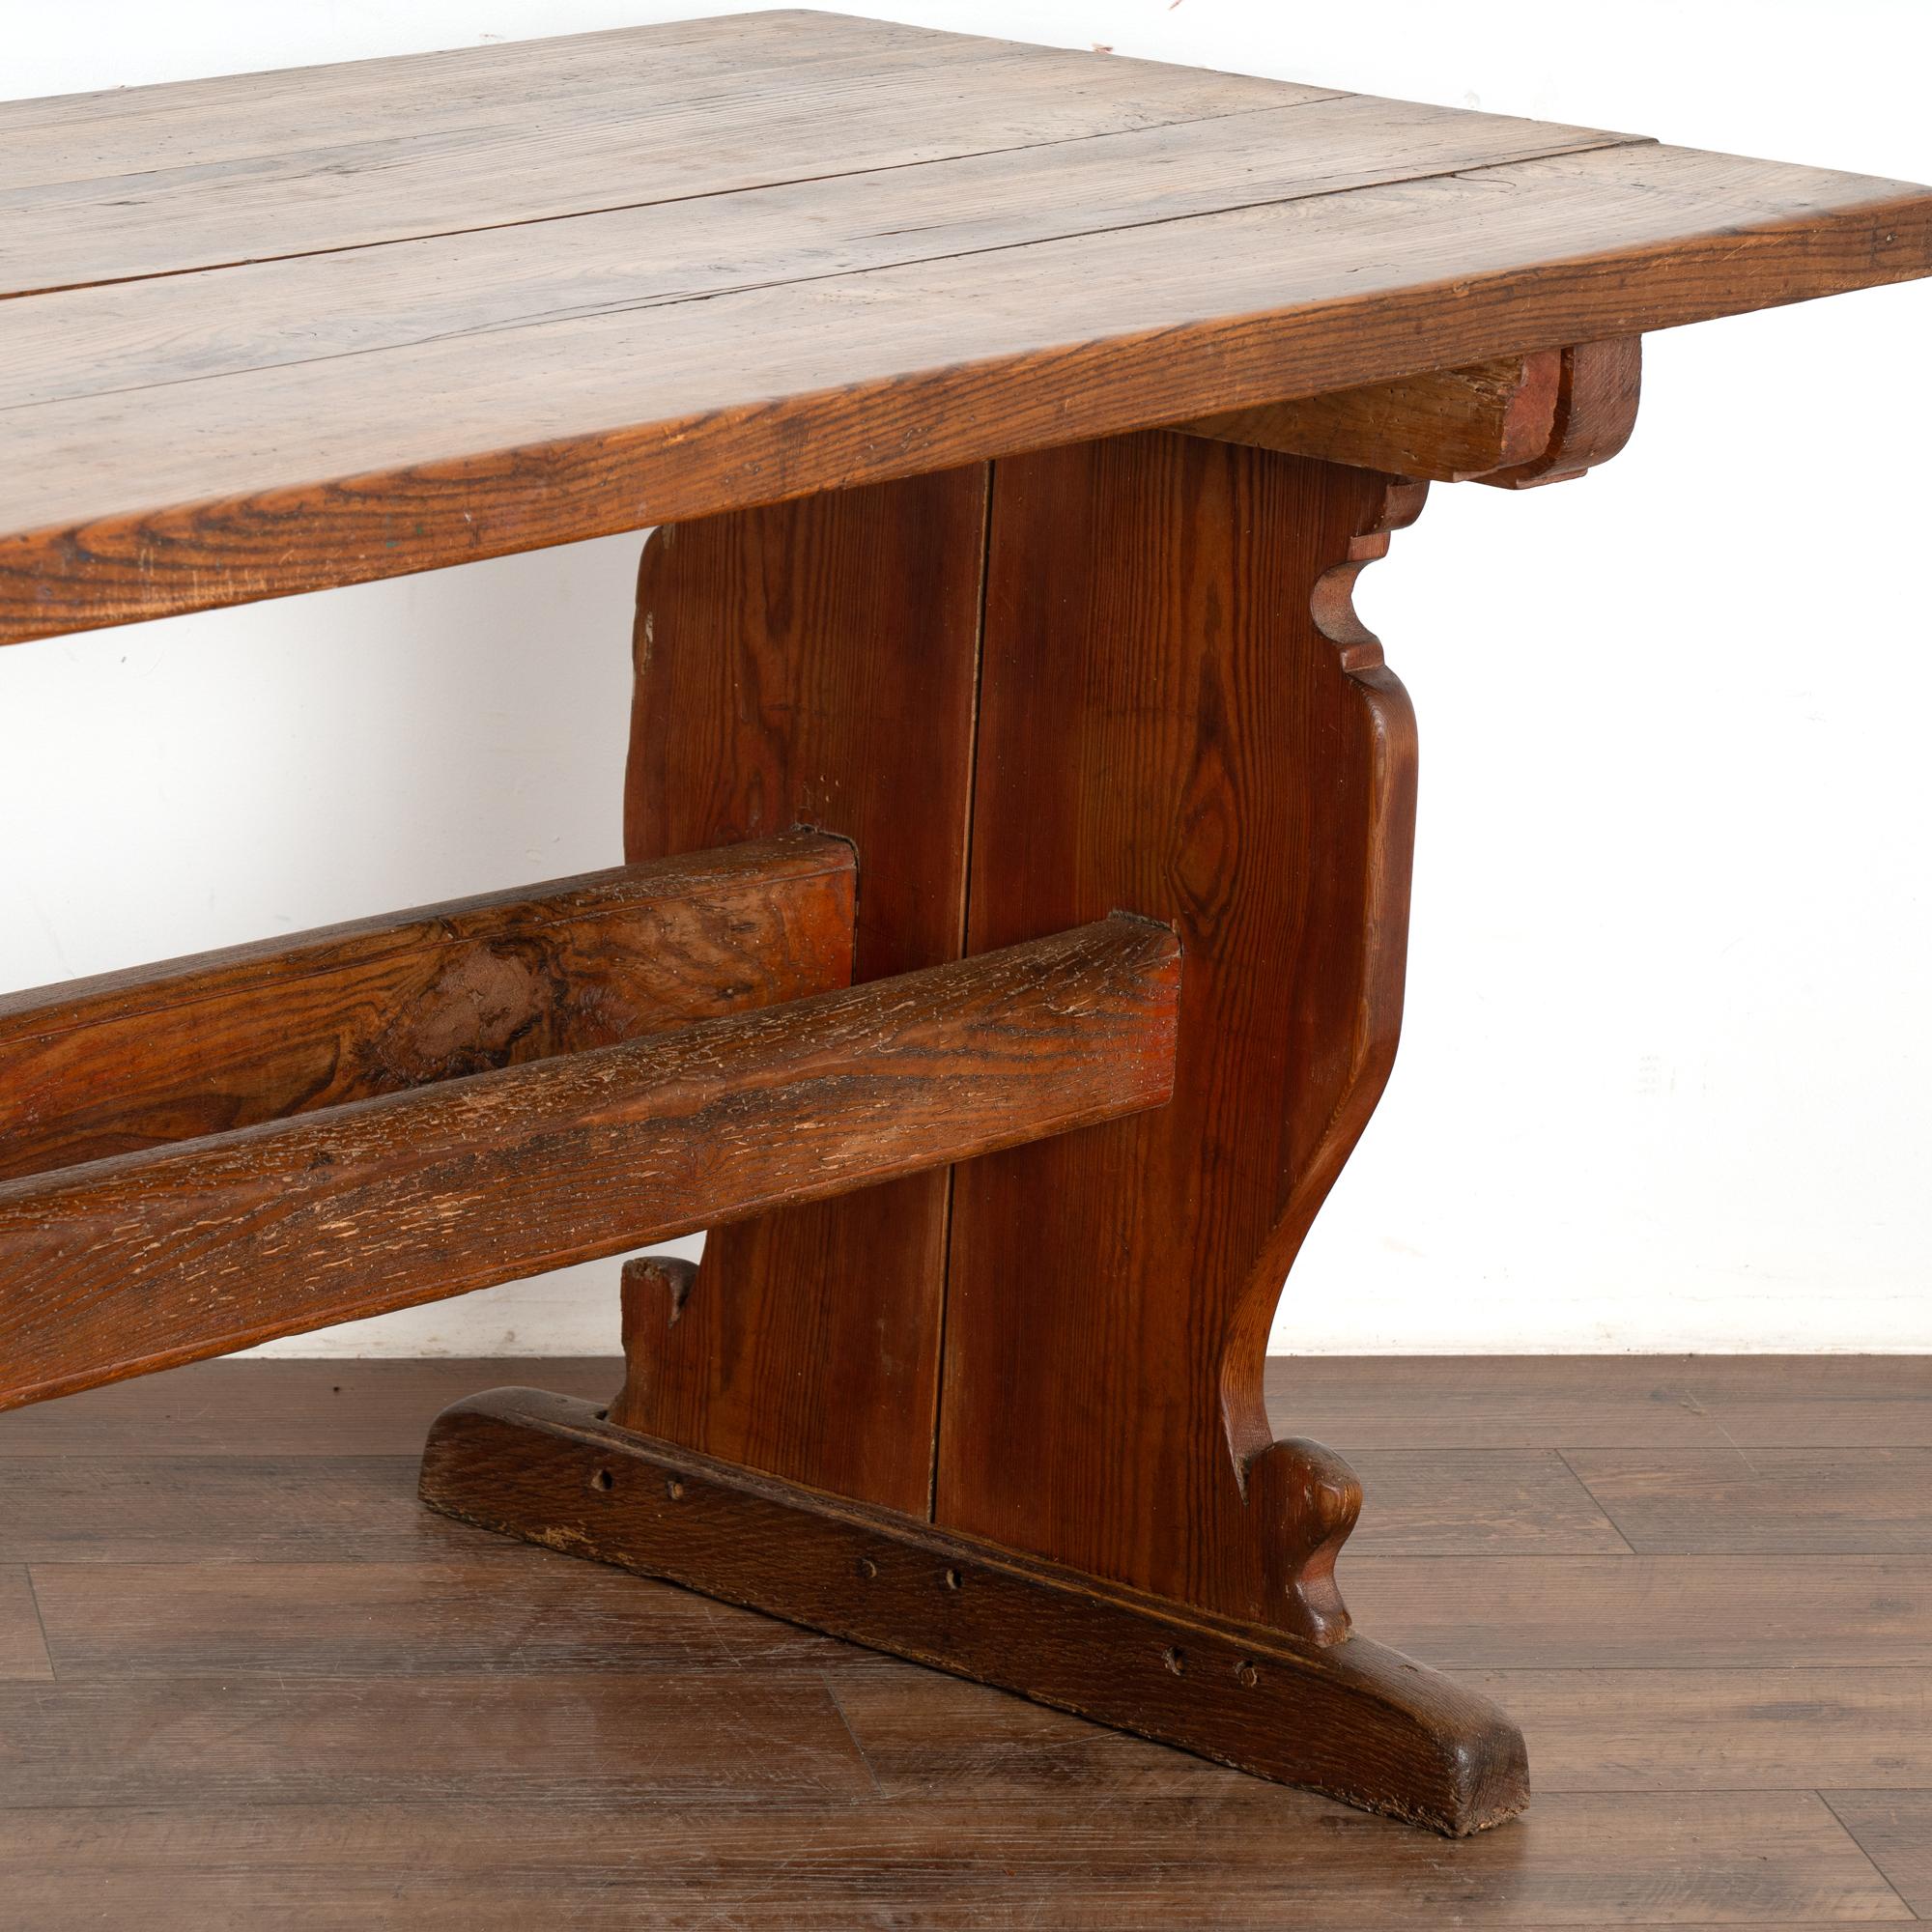 19th Century Farm Dining Kitchen Table With Trestle Base, Denmark circa 1820-40 For Sale